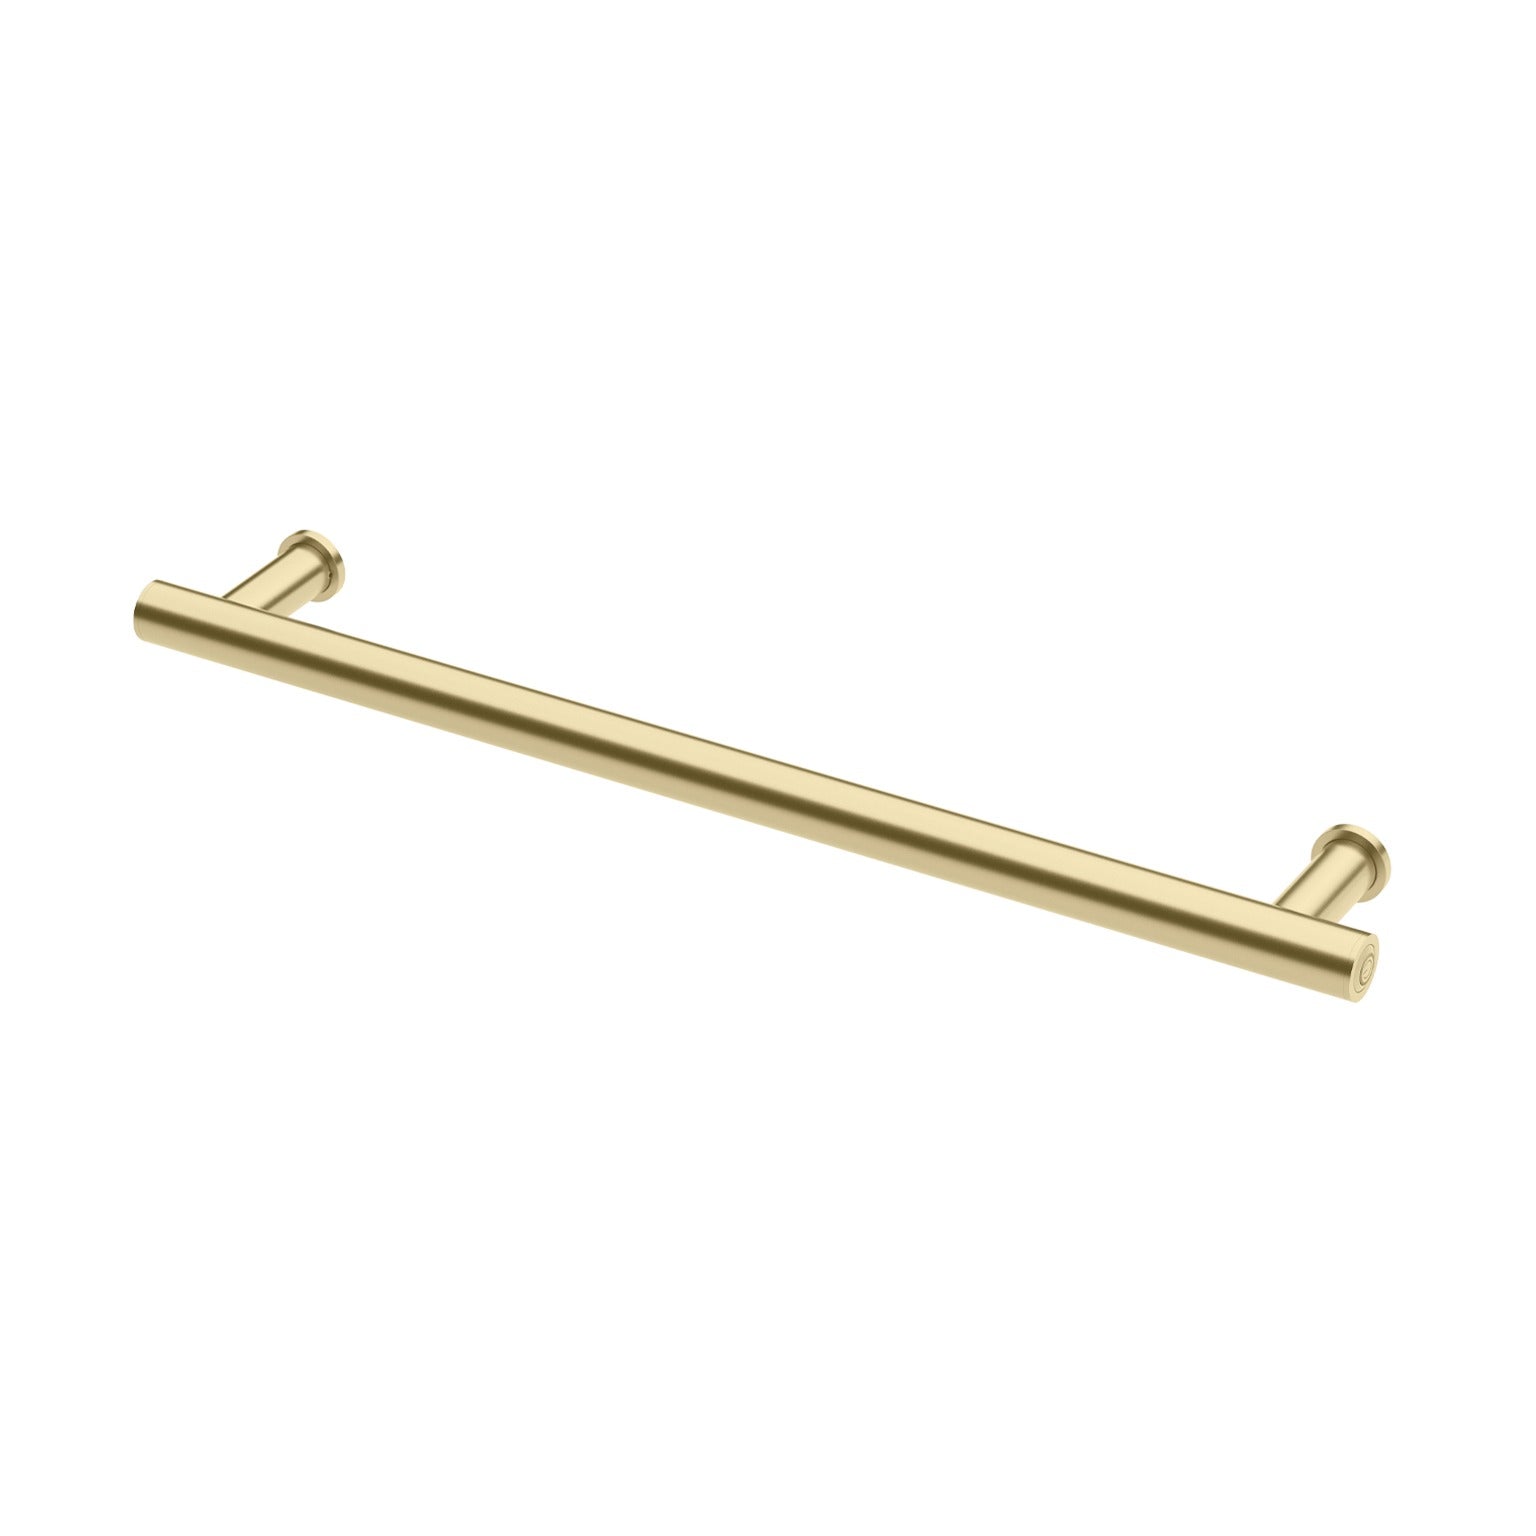 PHOENIX ROUND SINGLE HEATED TOWEL RAIL BRUSHED GOLD (AVAILABLE IN 600MM AND 800MM)